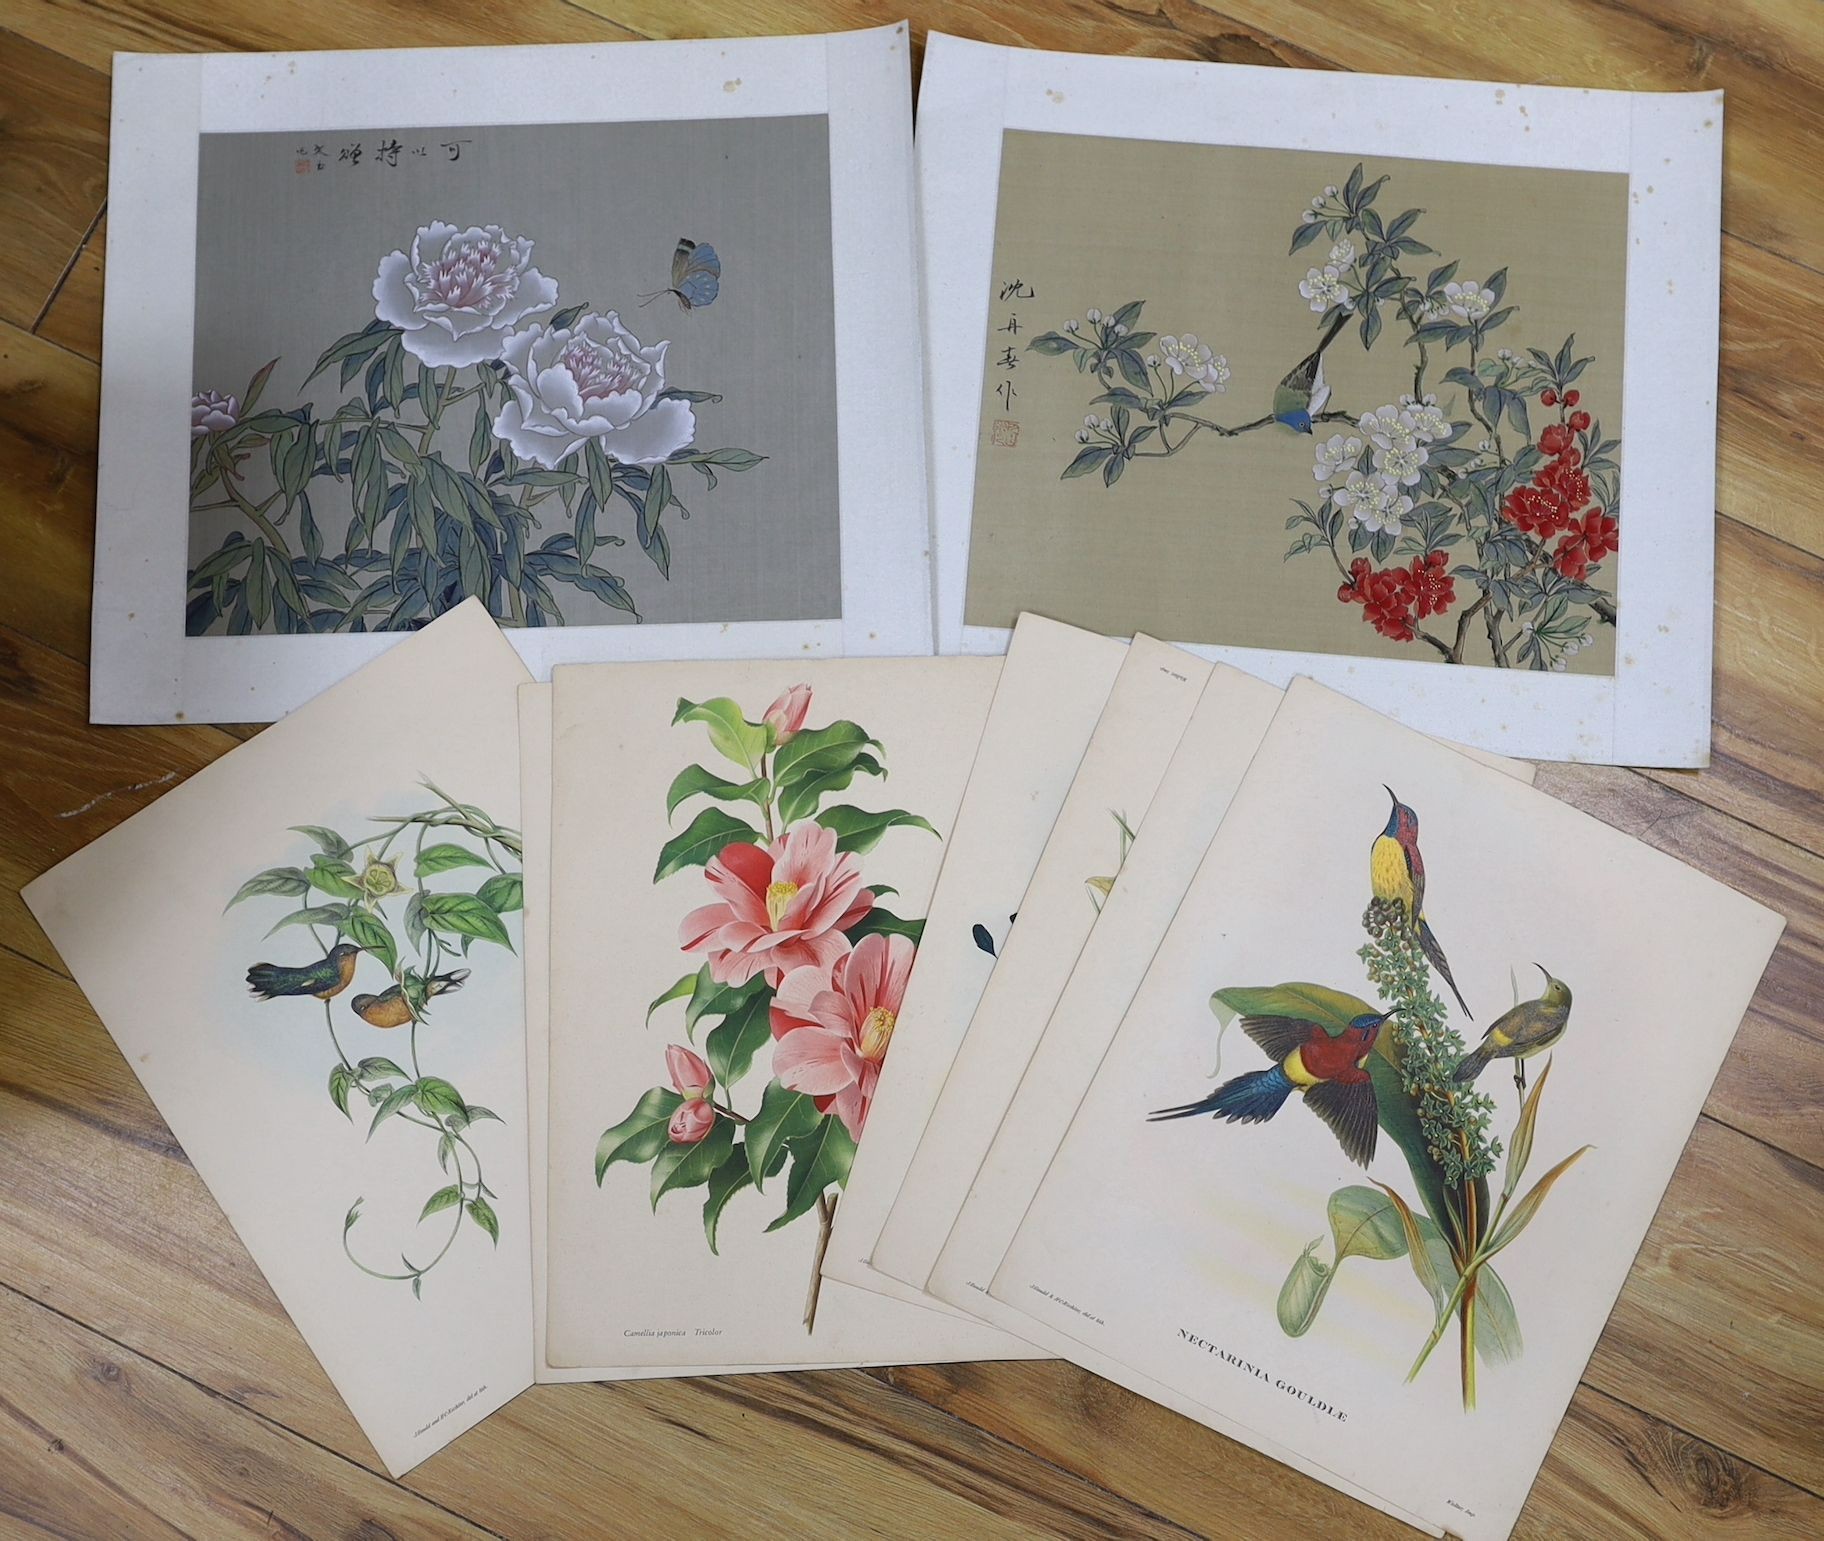 Seven unframed ornithological prints after Gould and Richter, 38 x 30cm and two Chinese watercolours on silk, 30 x 36cm, all unframed